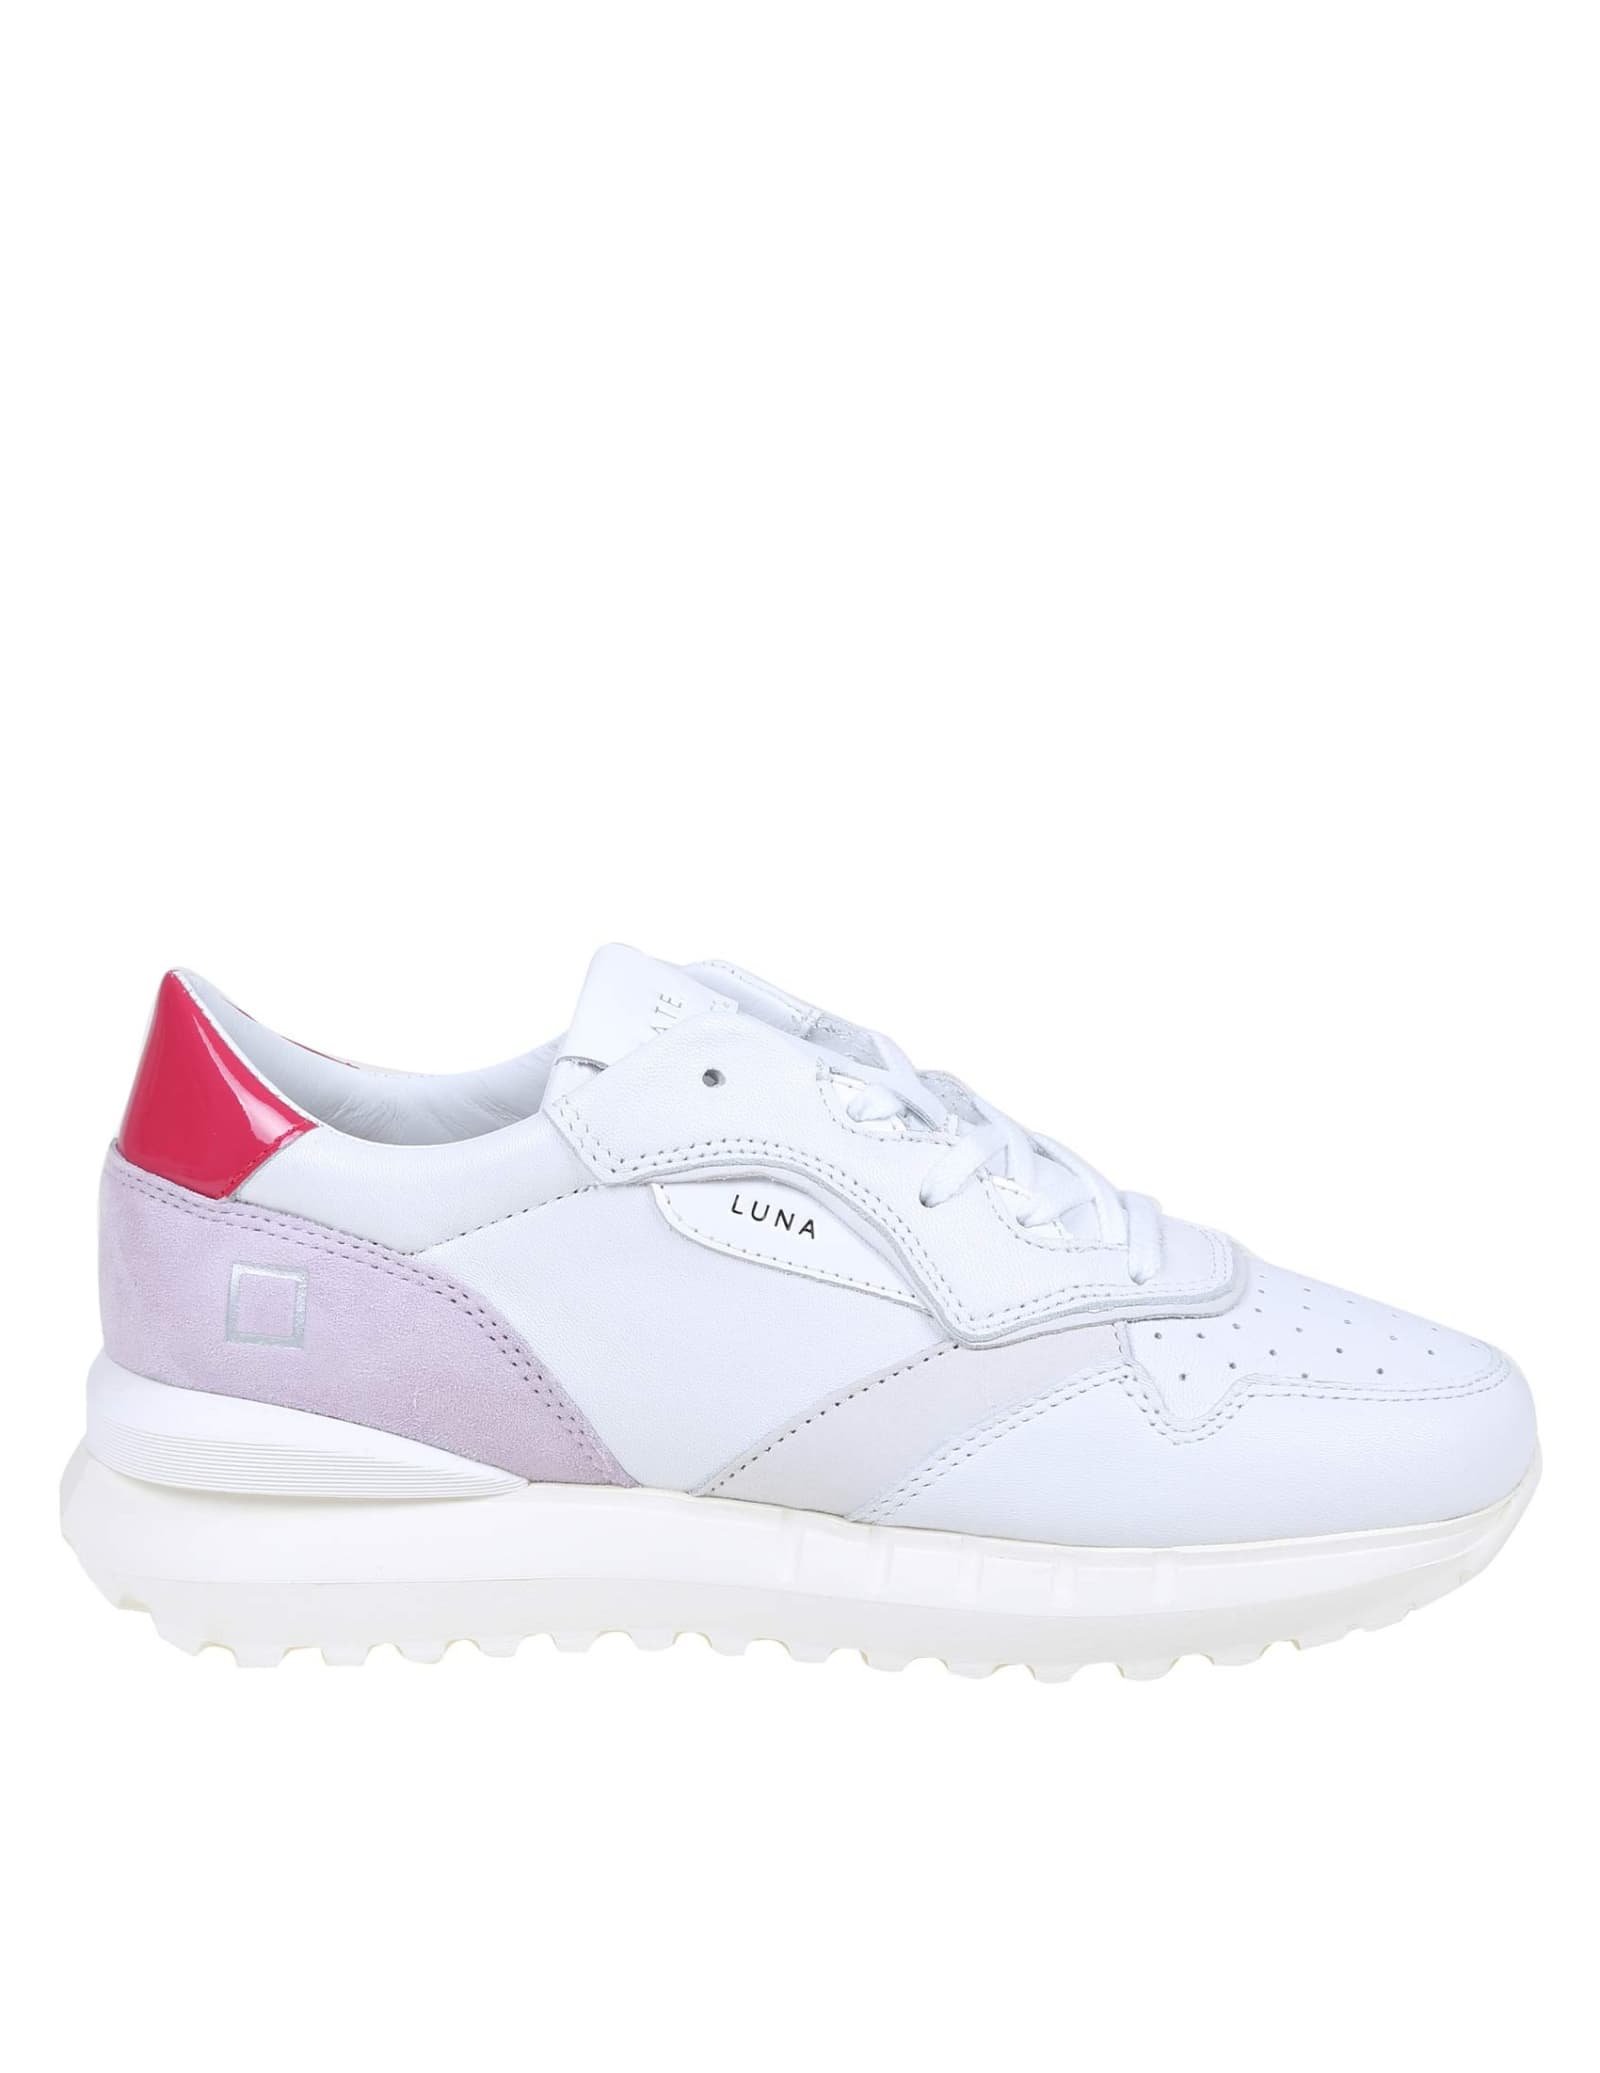 D.A.T.E. White And Fuchsia Leather Sneakers